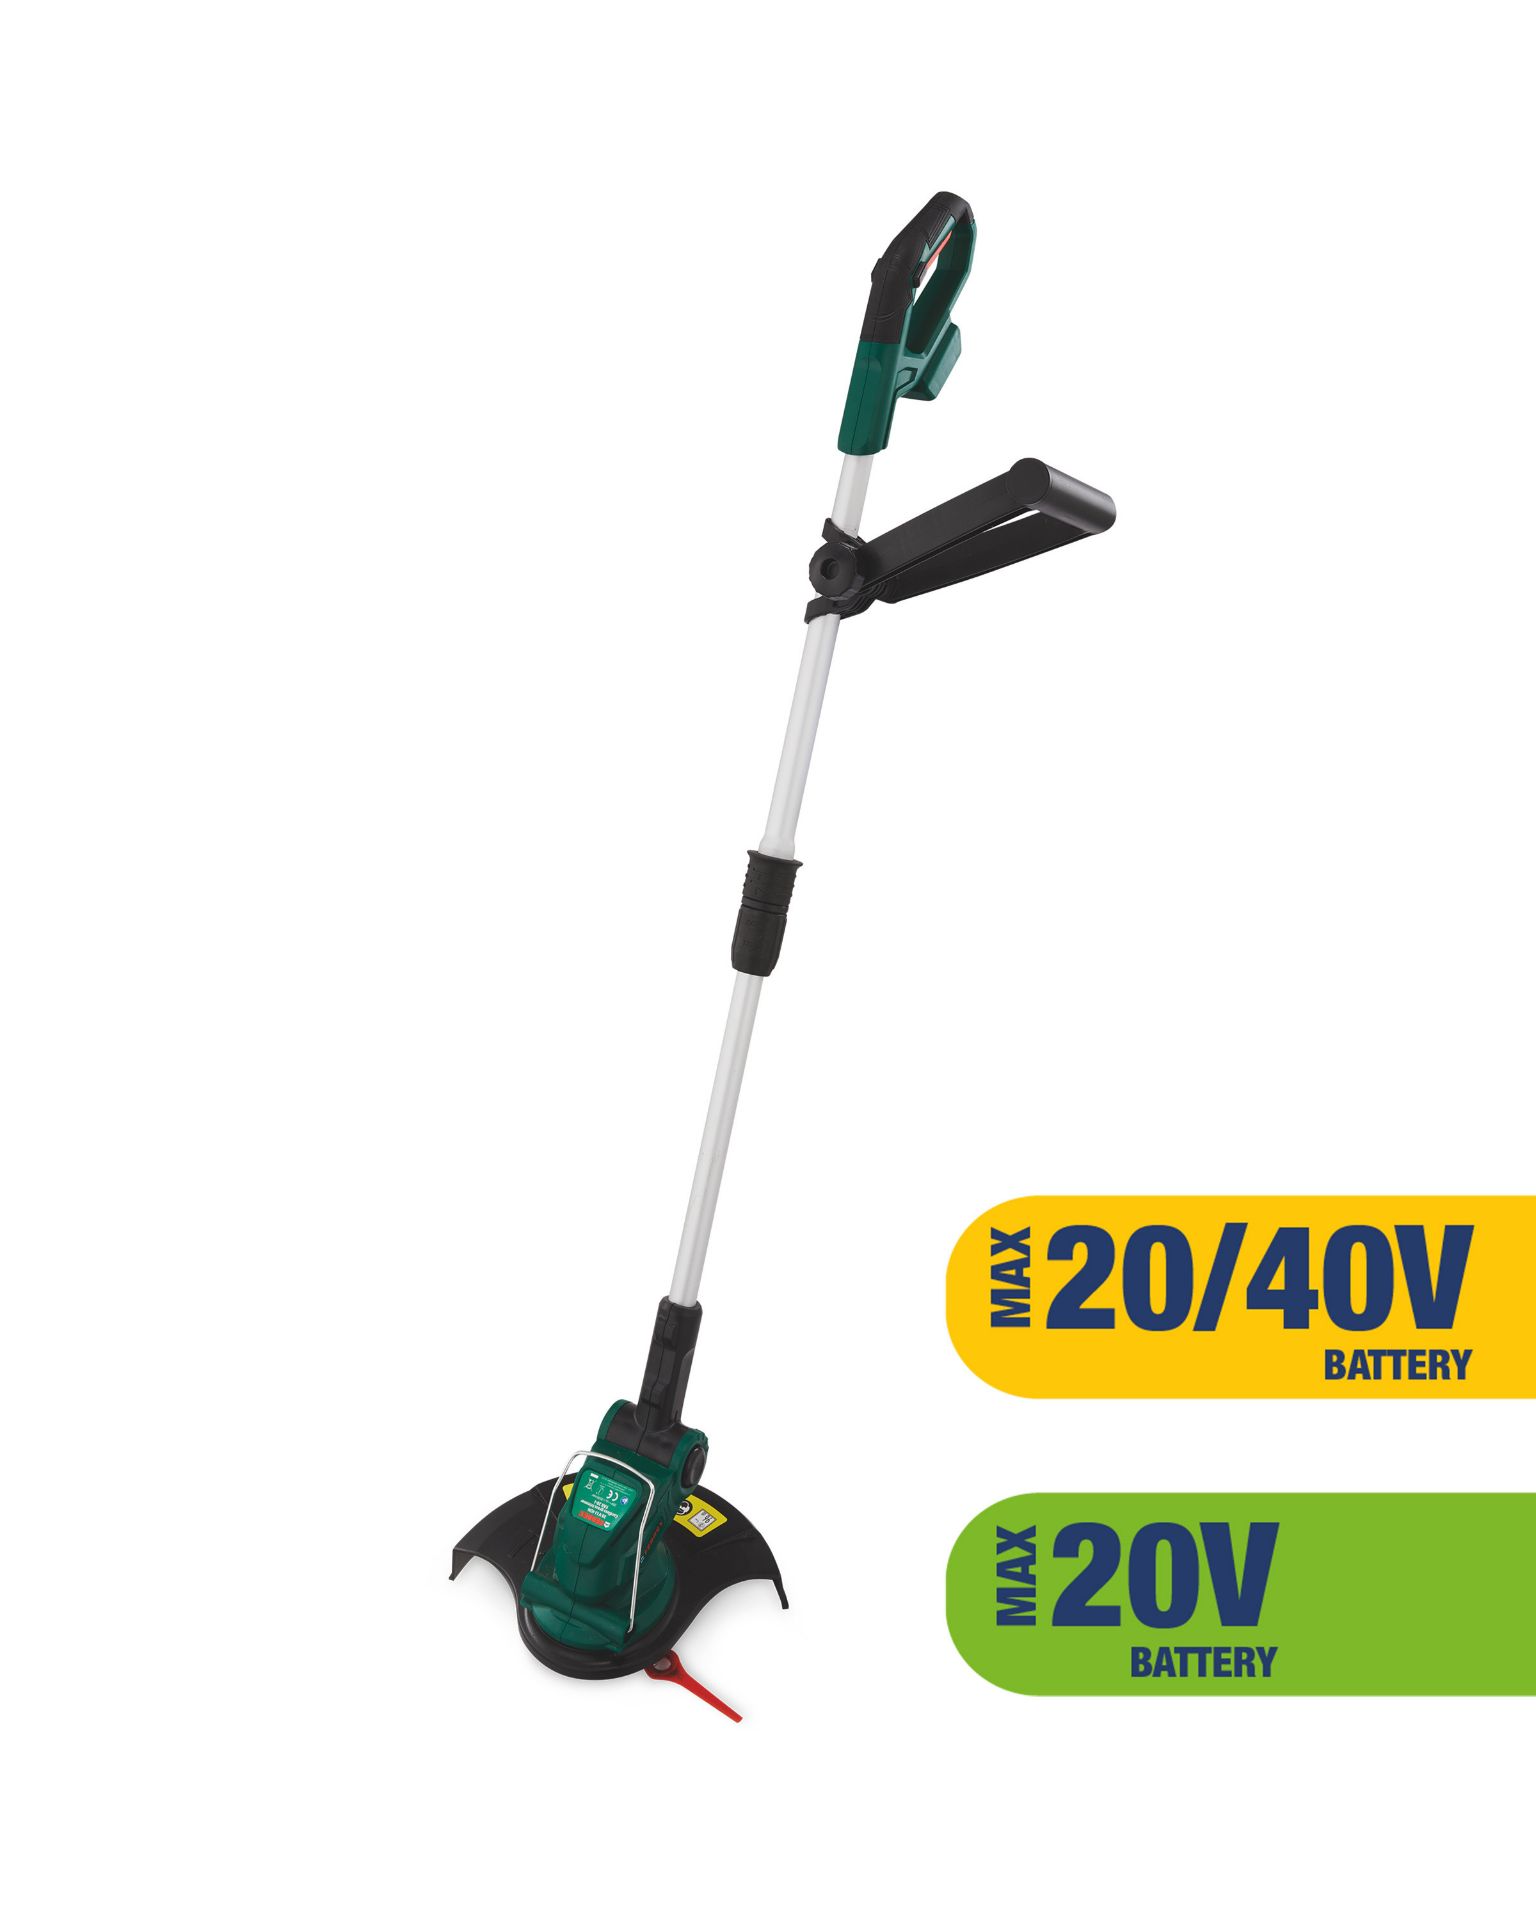 Boxed Ferrex 20V Cordless Lithium Iron Grass Trimmer RRP £45 (Public Viewing and Appraisals